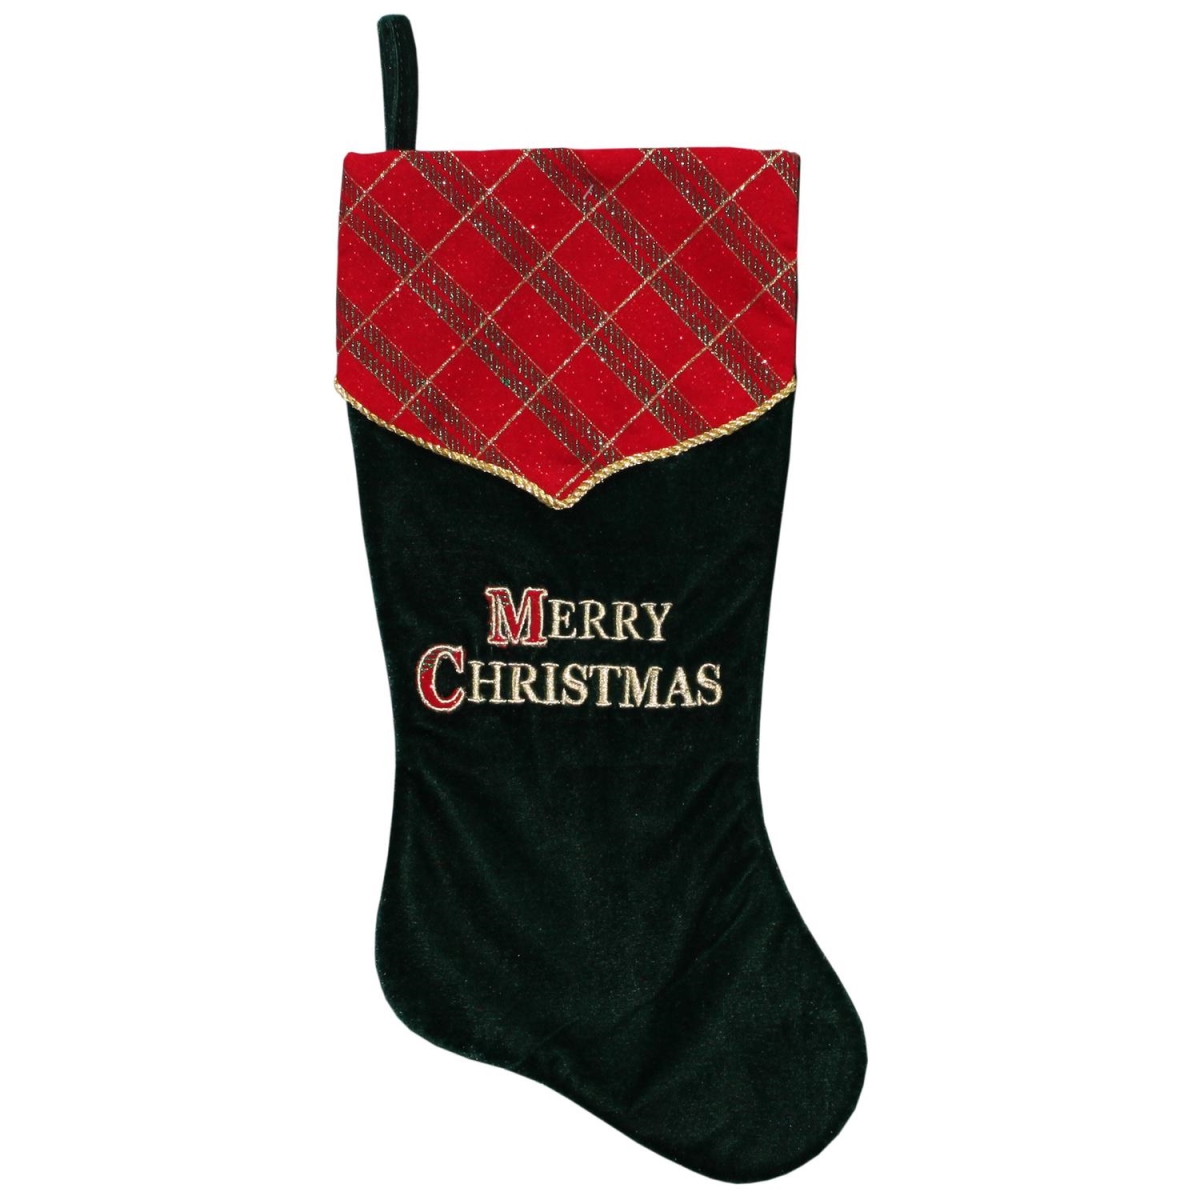 32635893 19 In. Green Velvet Christmas Stocking With Red Plaid Metallic Cuff Embroidered Design & Cord Piping